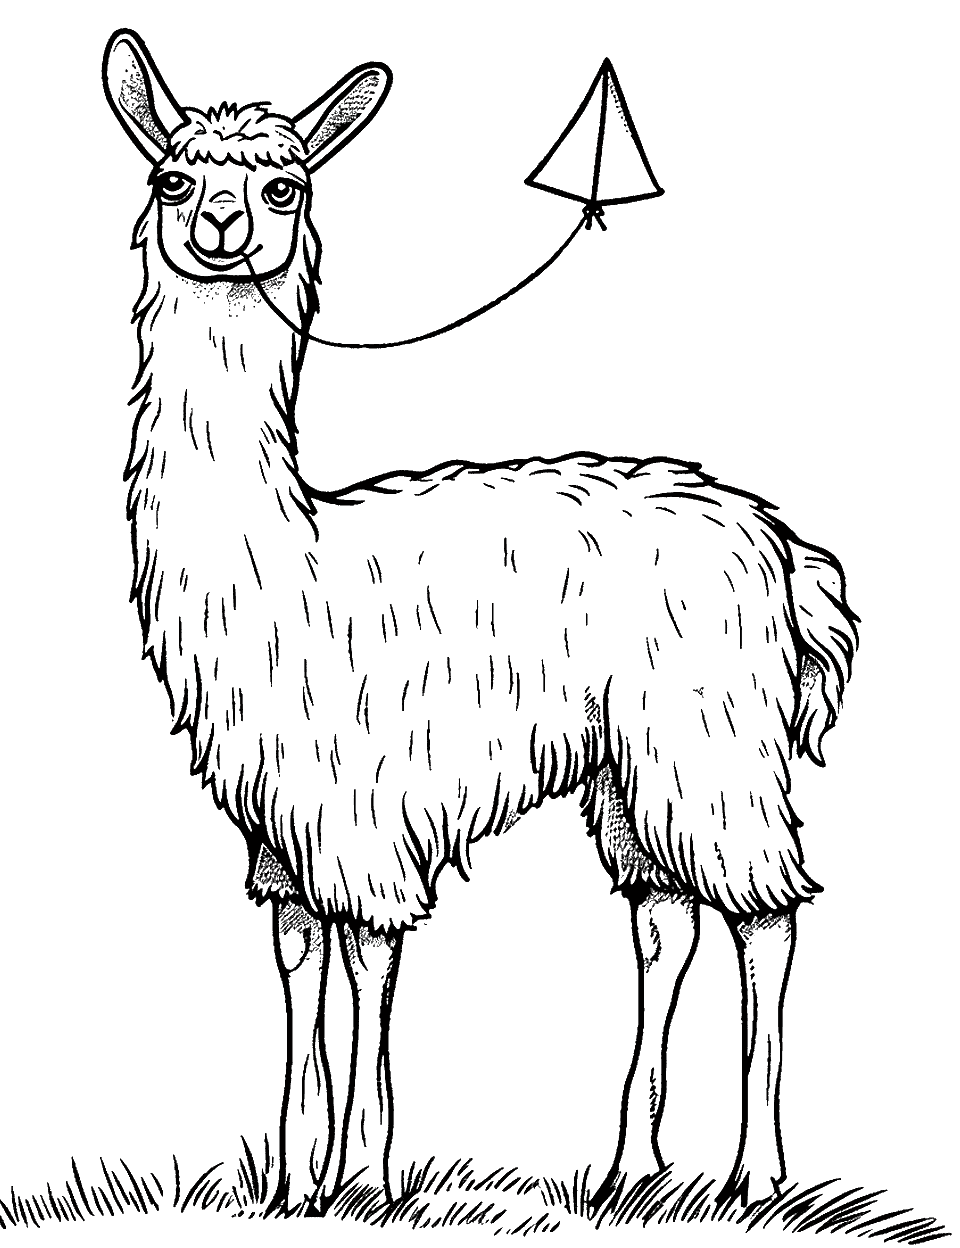 Llama with a Kite Coloring Page - A llama holding the string of a small flying kite.